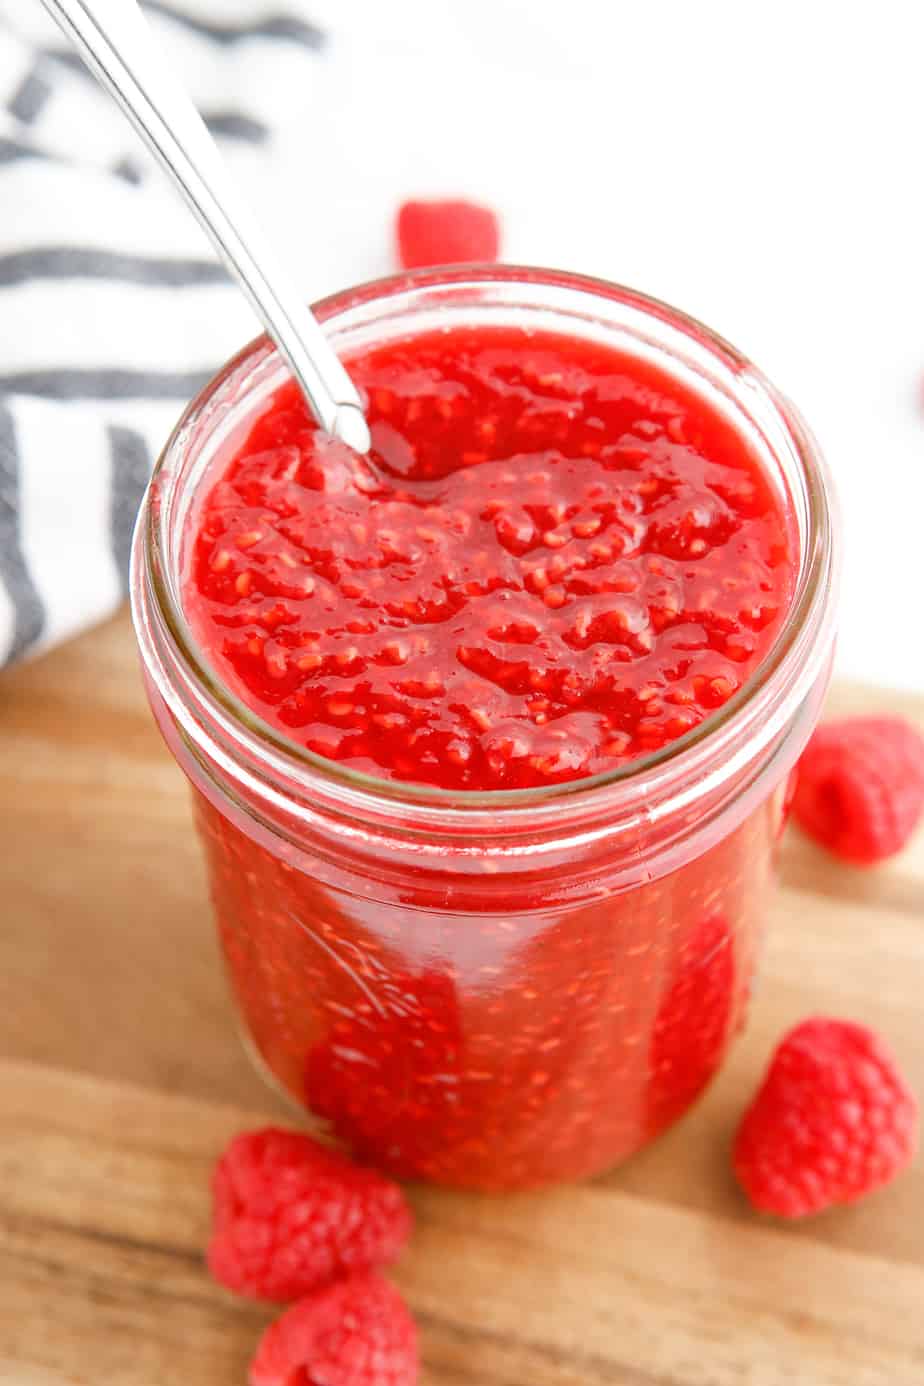 Looking down into a jar of raspberry jam with seeds, and a handle of a spoon sticking out